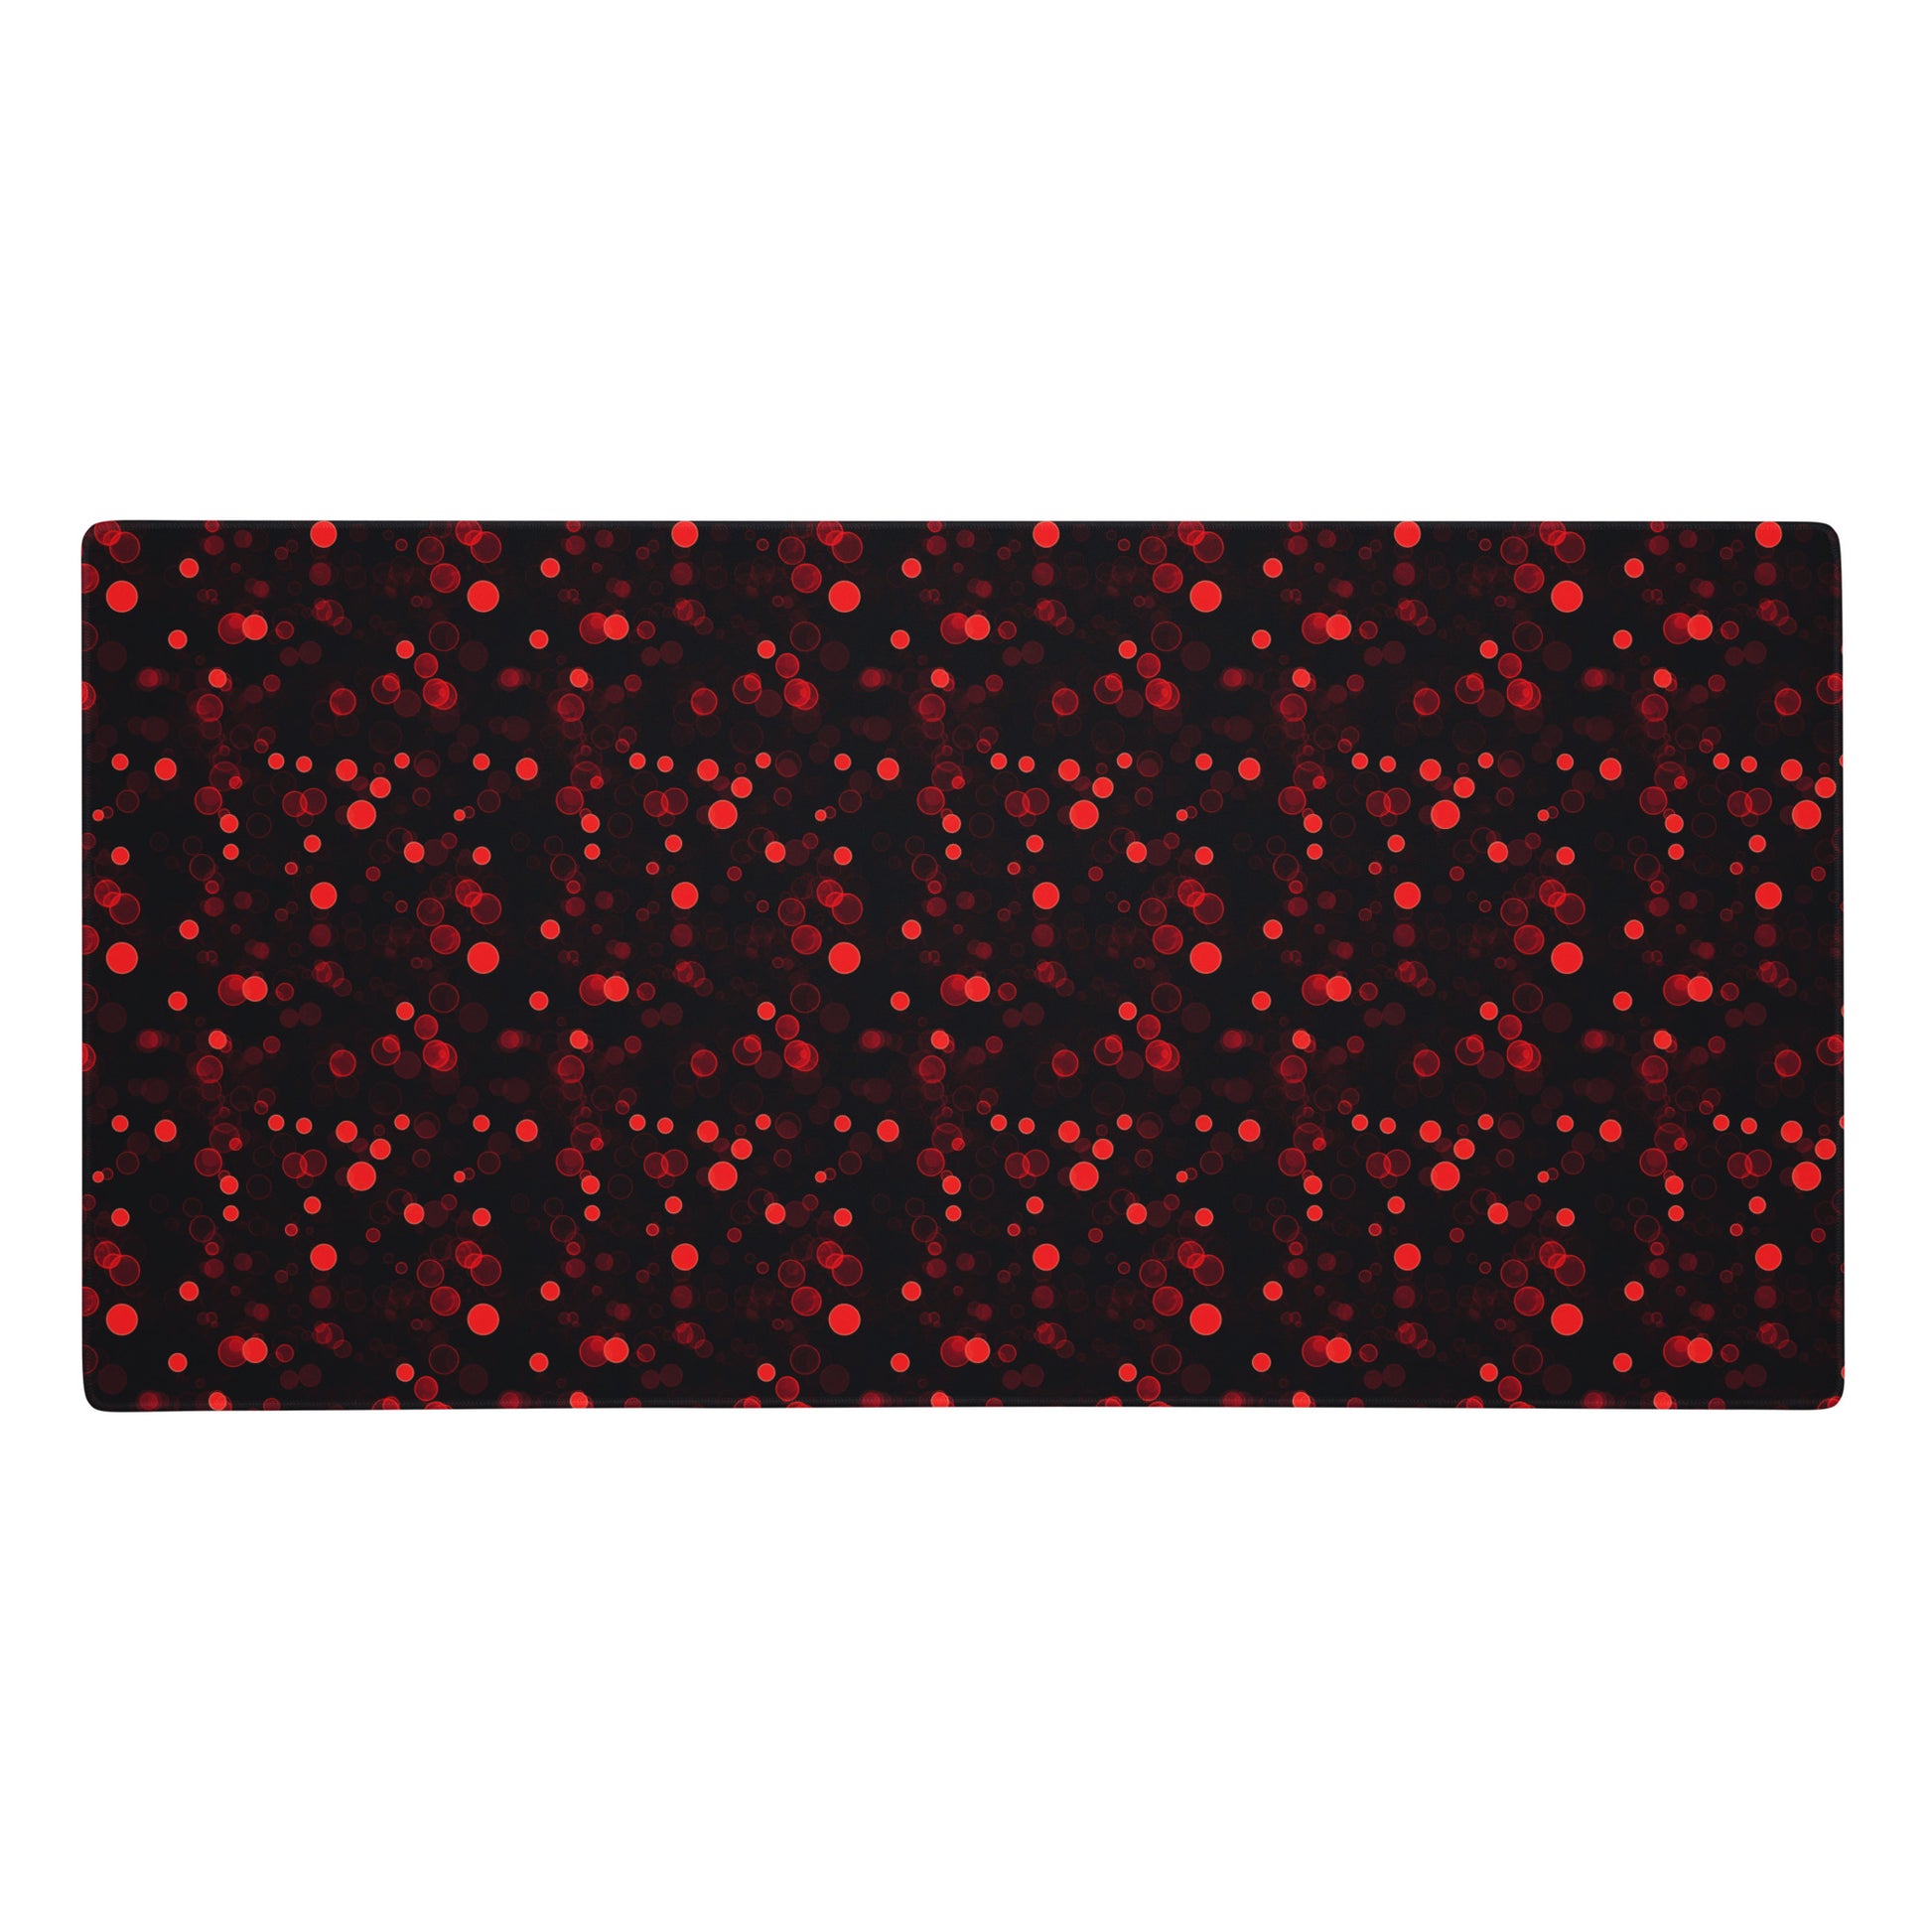 A 36" x 18" desk pad with red polka dots.